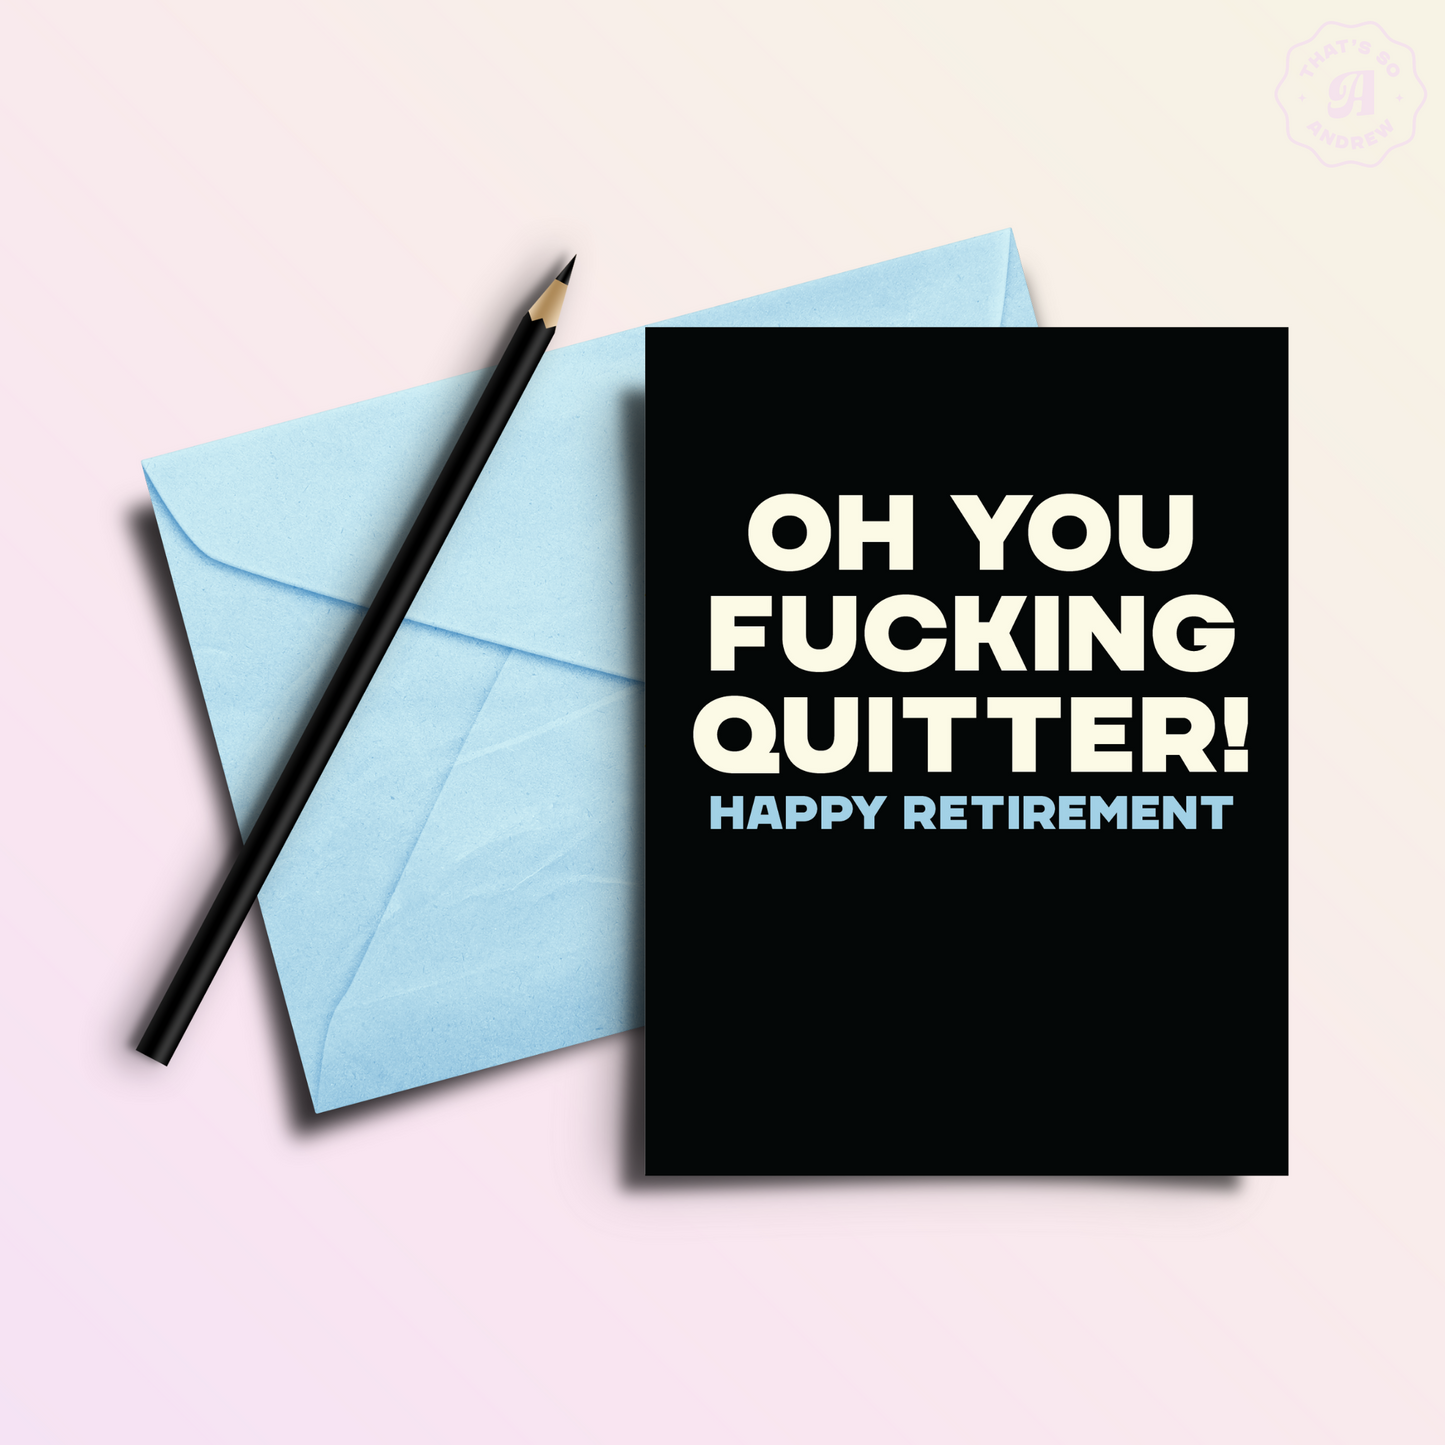 Quitter! | Funny No Job Greeting Card